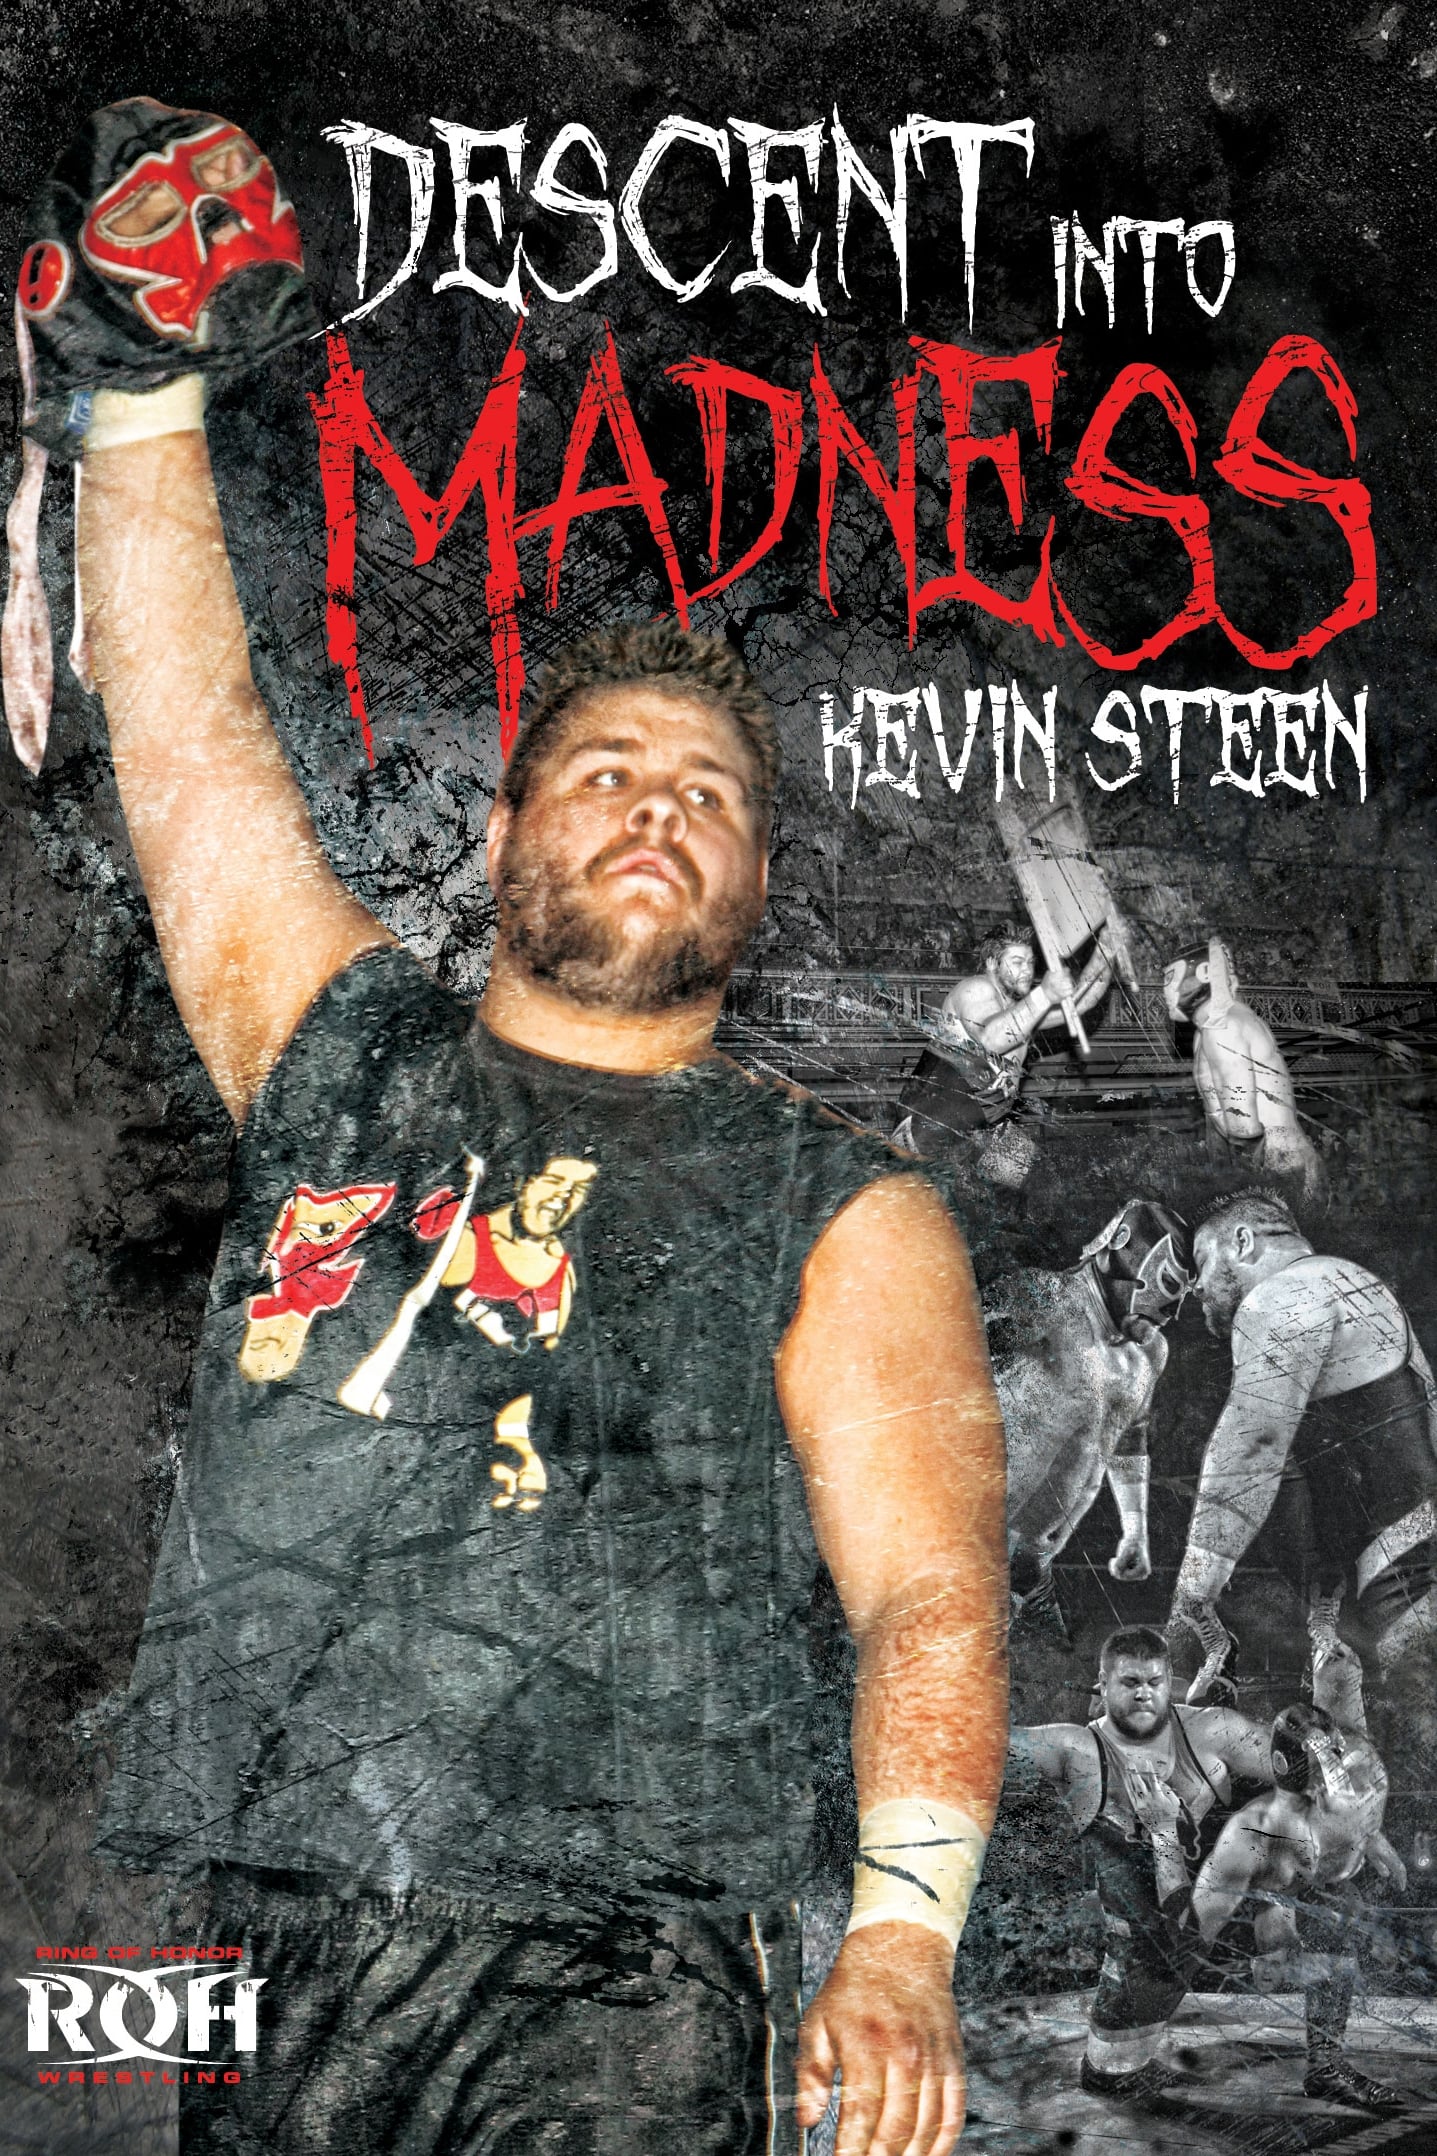 Kevin Steen: Descent into Madness